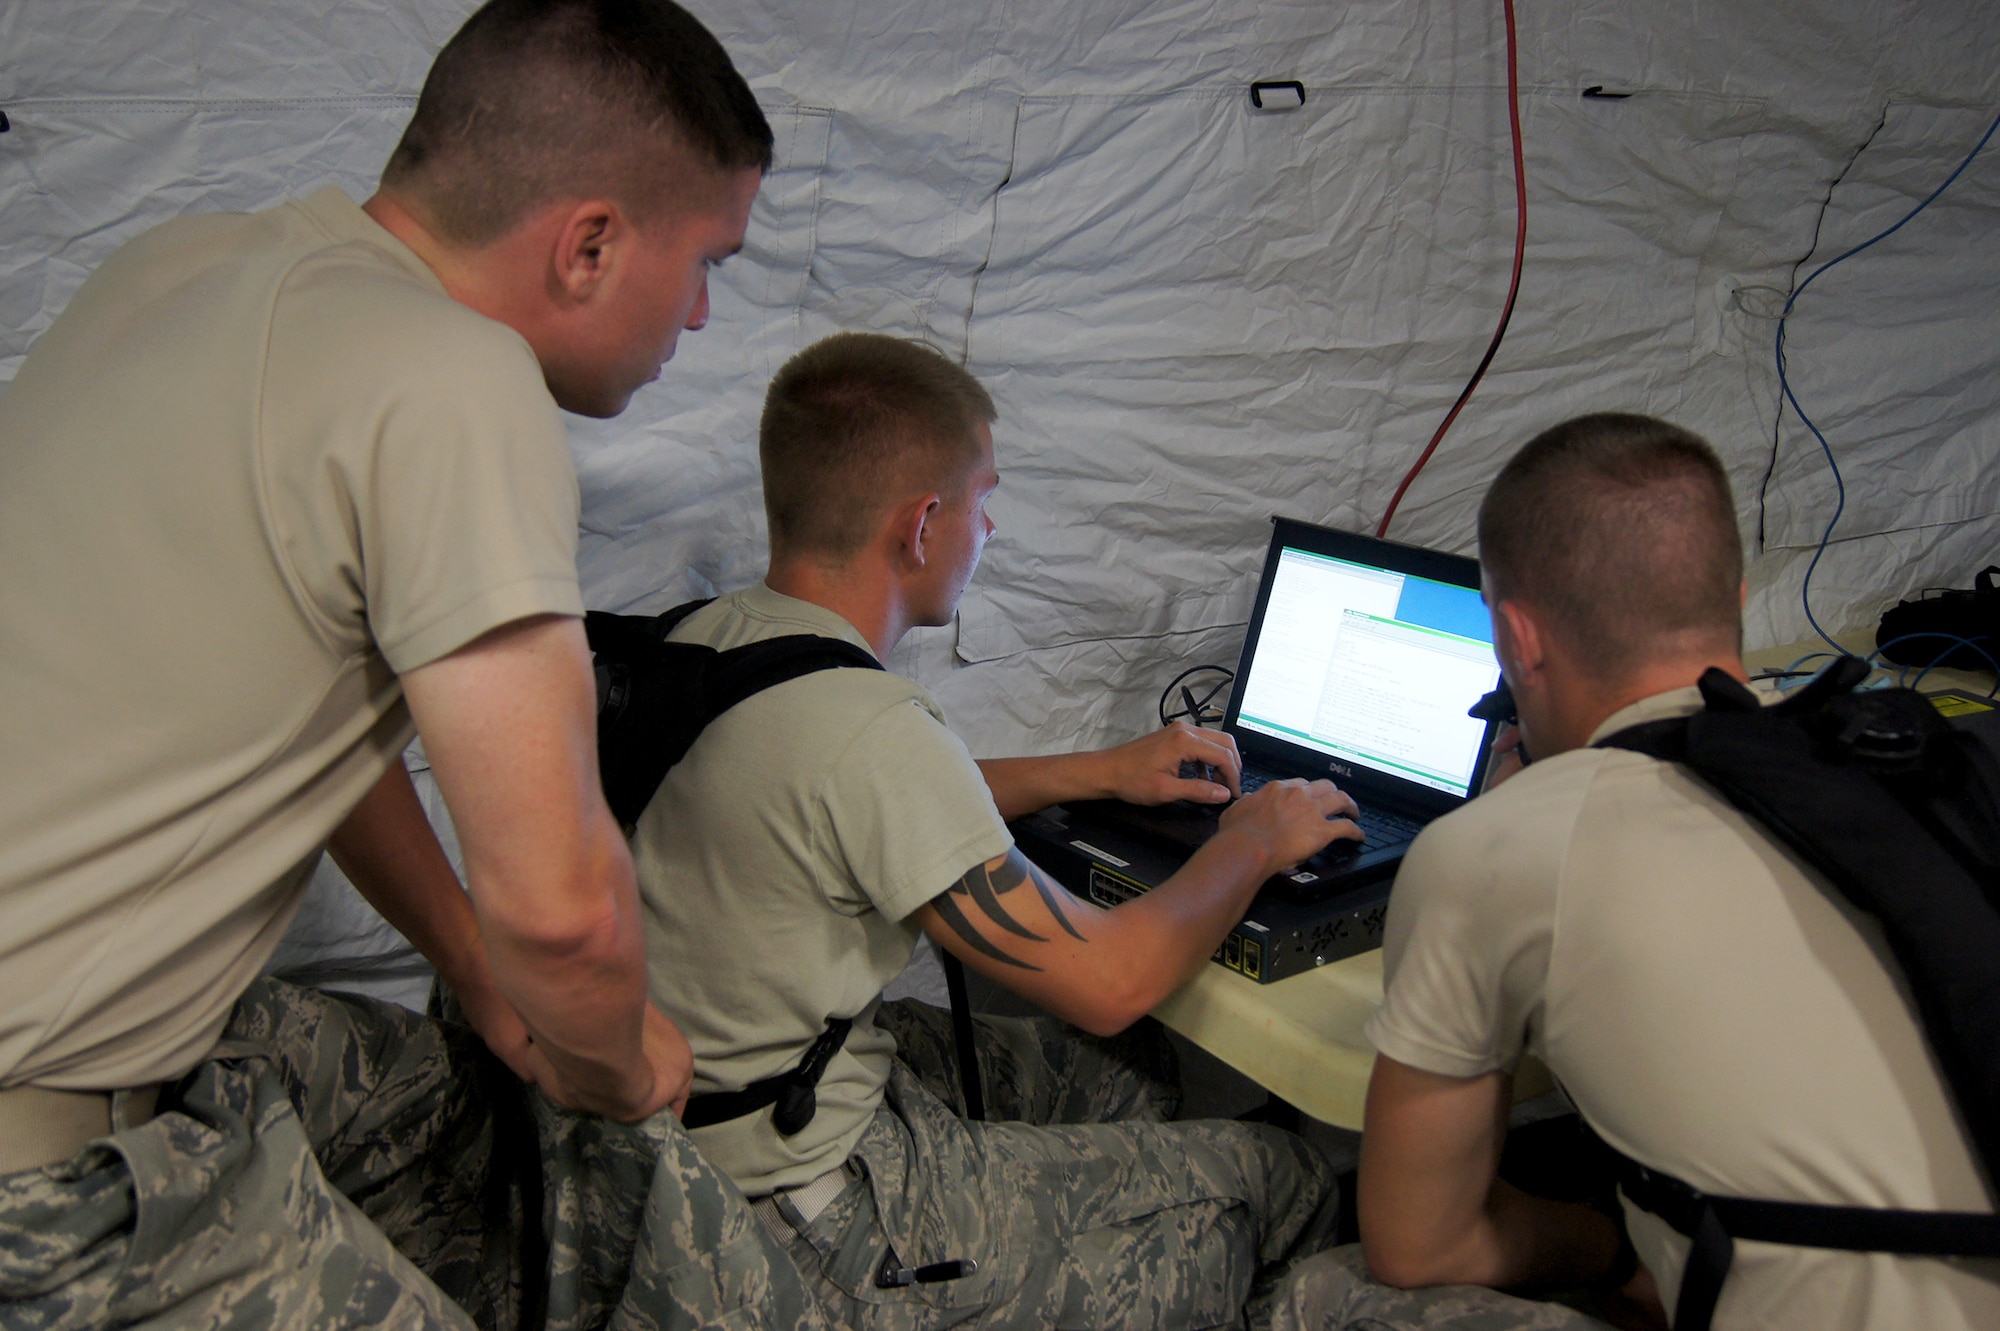 Members of the 35th Combat Communications Squadron, Tinker Air Force Base, Okla., hone their skill during a field training exercise at the Lackland AFB Media Annex in San Antonio, Texas. The 35th CBCS is one of four Reserve combat communications squadrons located in separate regions of the country that provide theater-deployable communications during wartime and contingency operations or humanitarian missions in austere locations.